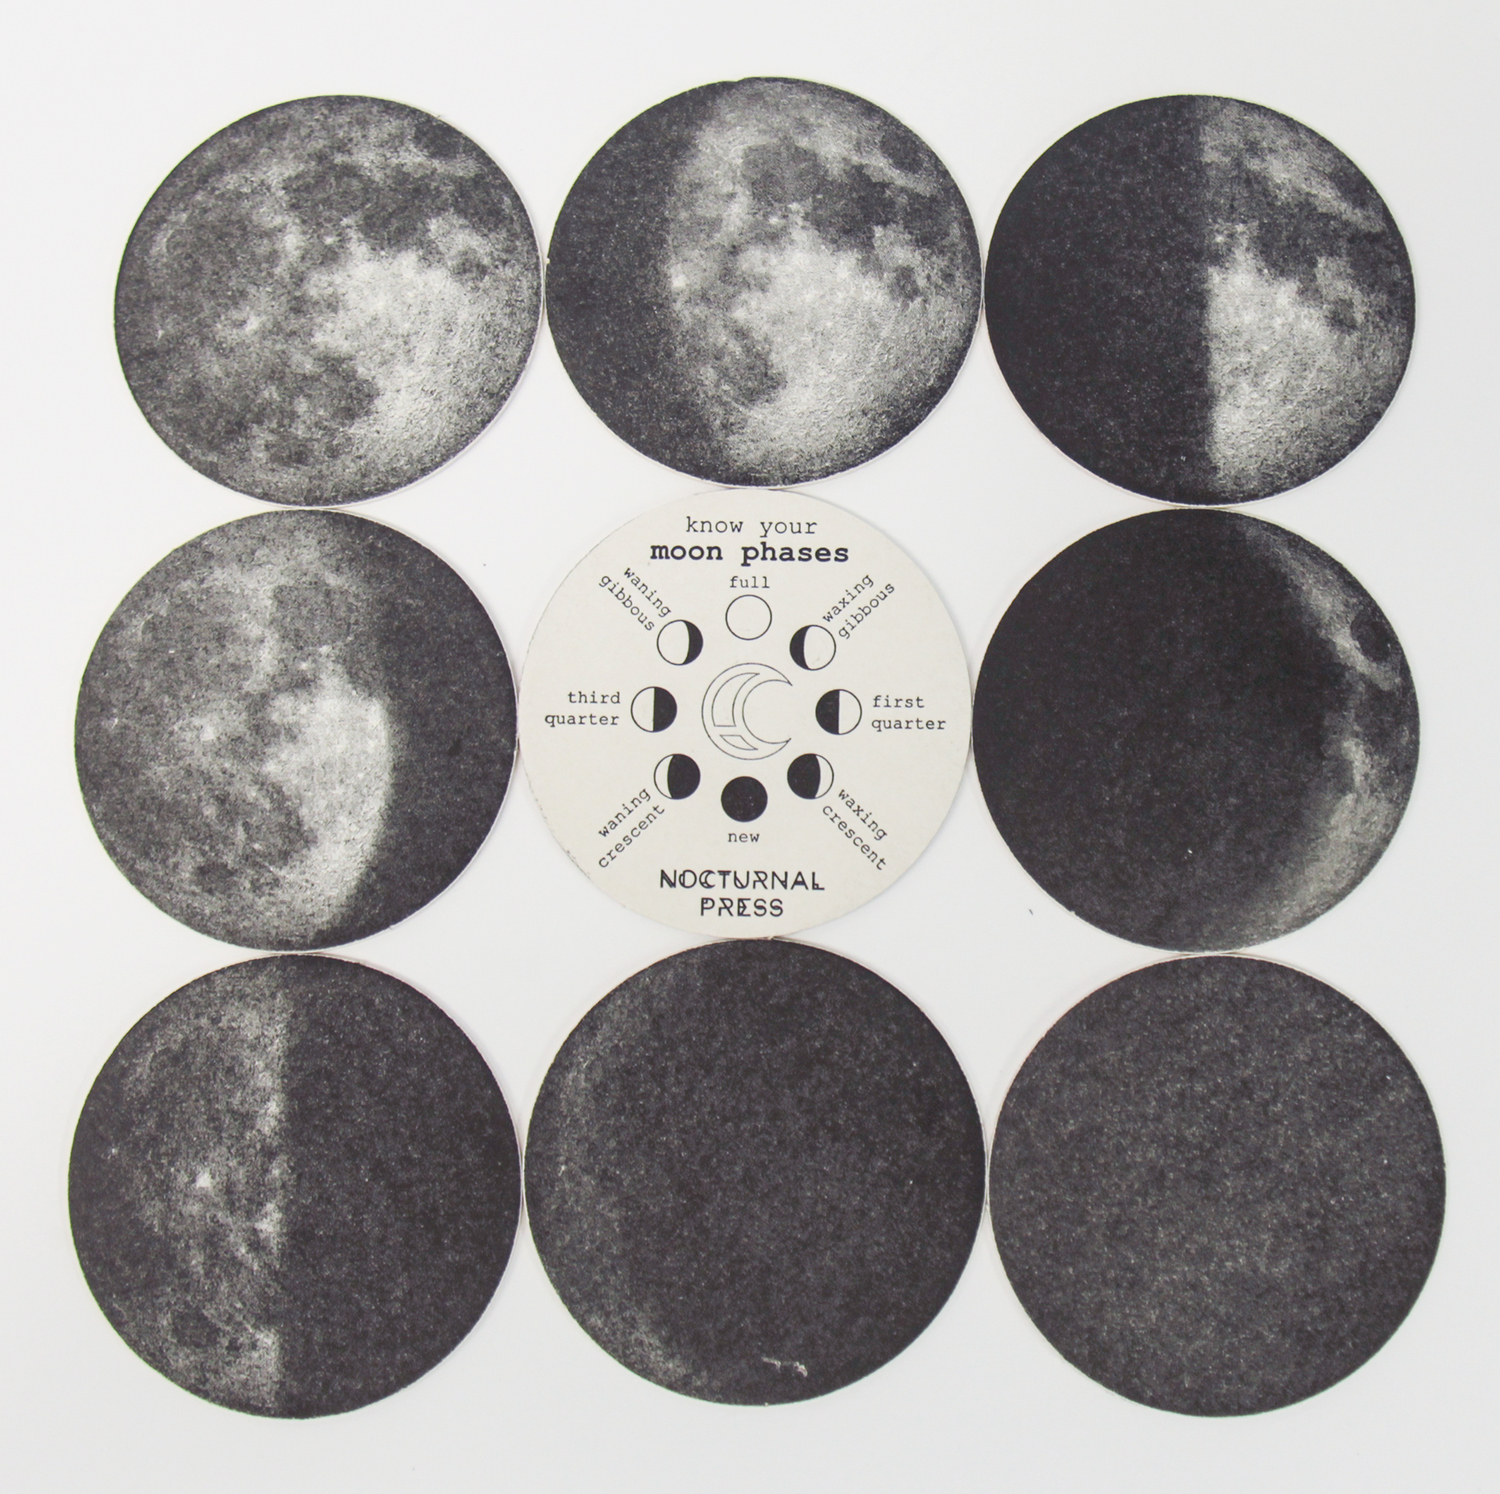 Laser Engraved Coaster Set Moon Phases Coaster Set of 4 Moon Phases Engraving